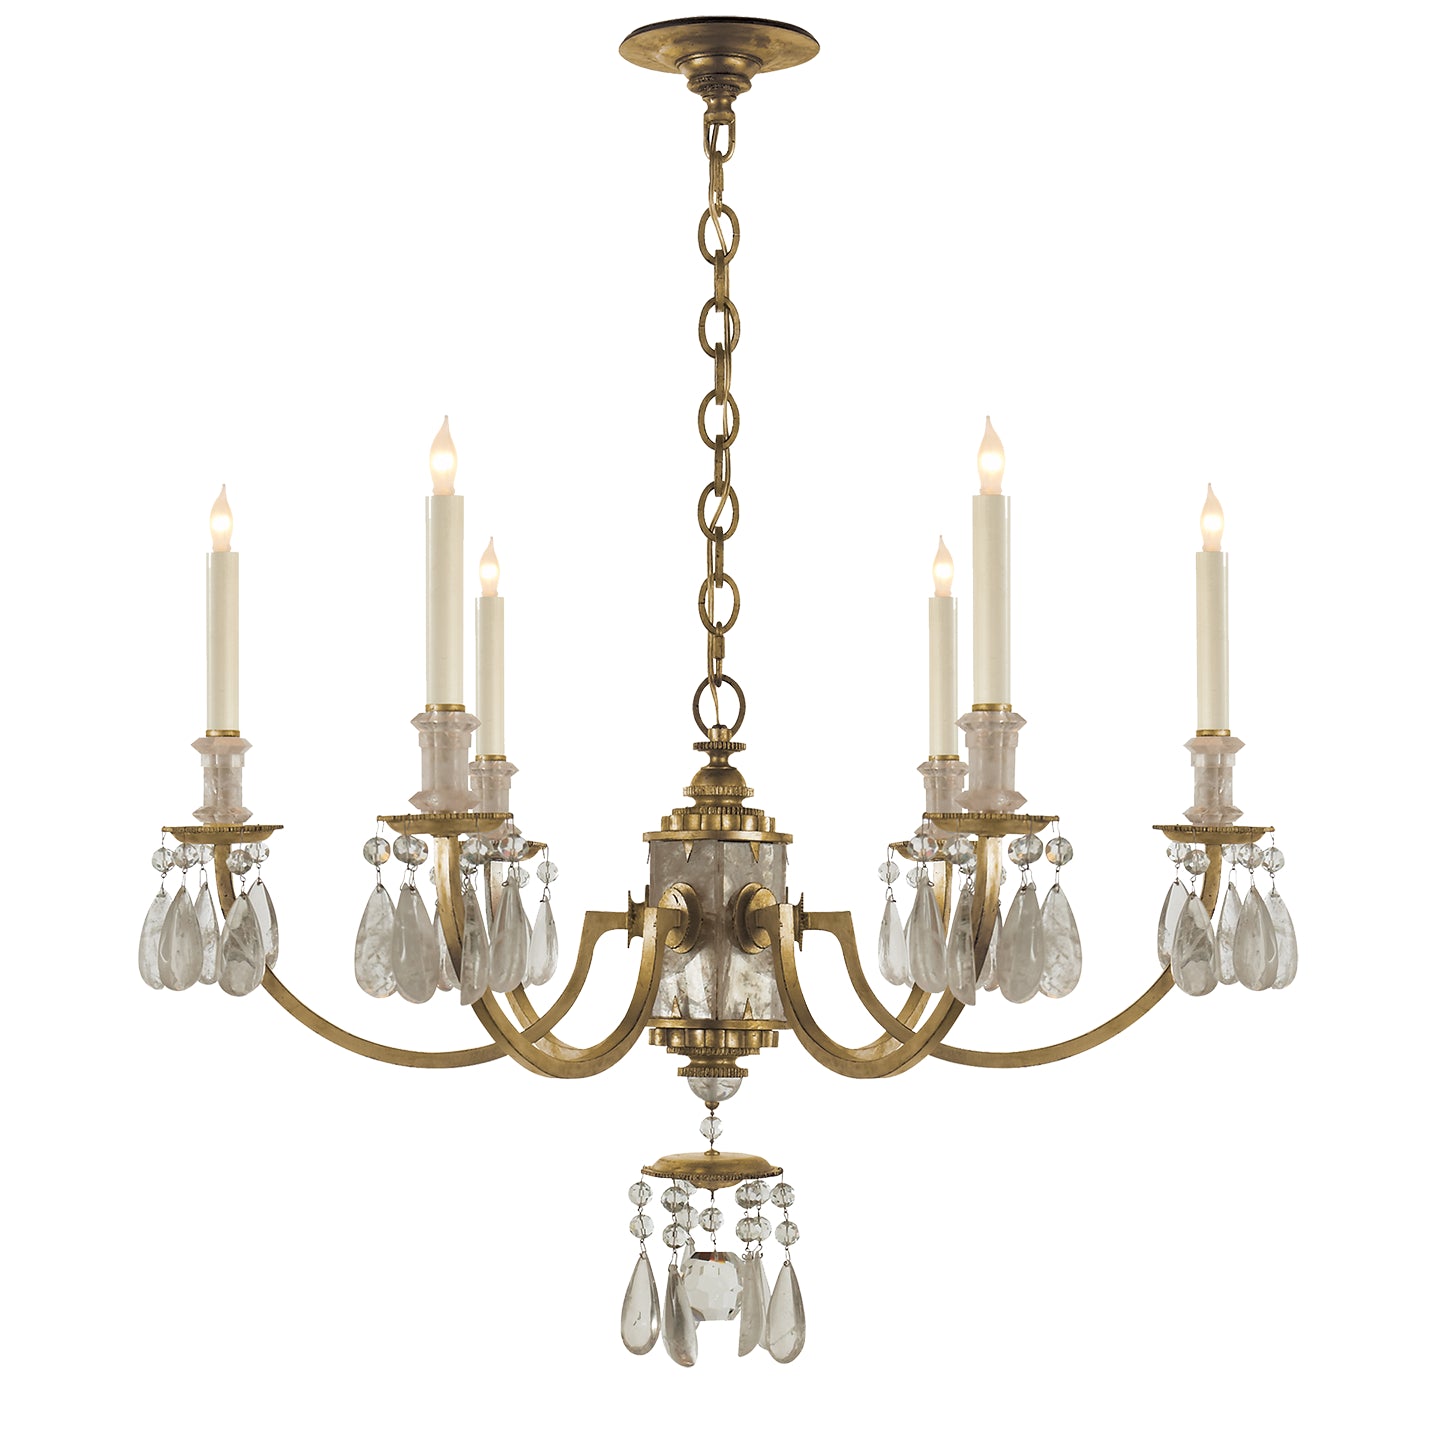 Load image into Gallery viewer, Visual Comfort Signature - TOB 5036GI - Six Light Chandelier - Elizabeth - Gilded Iron
